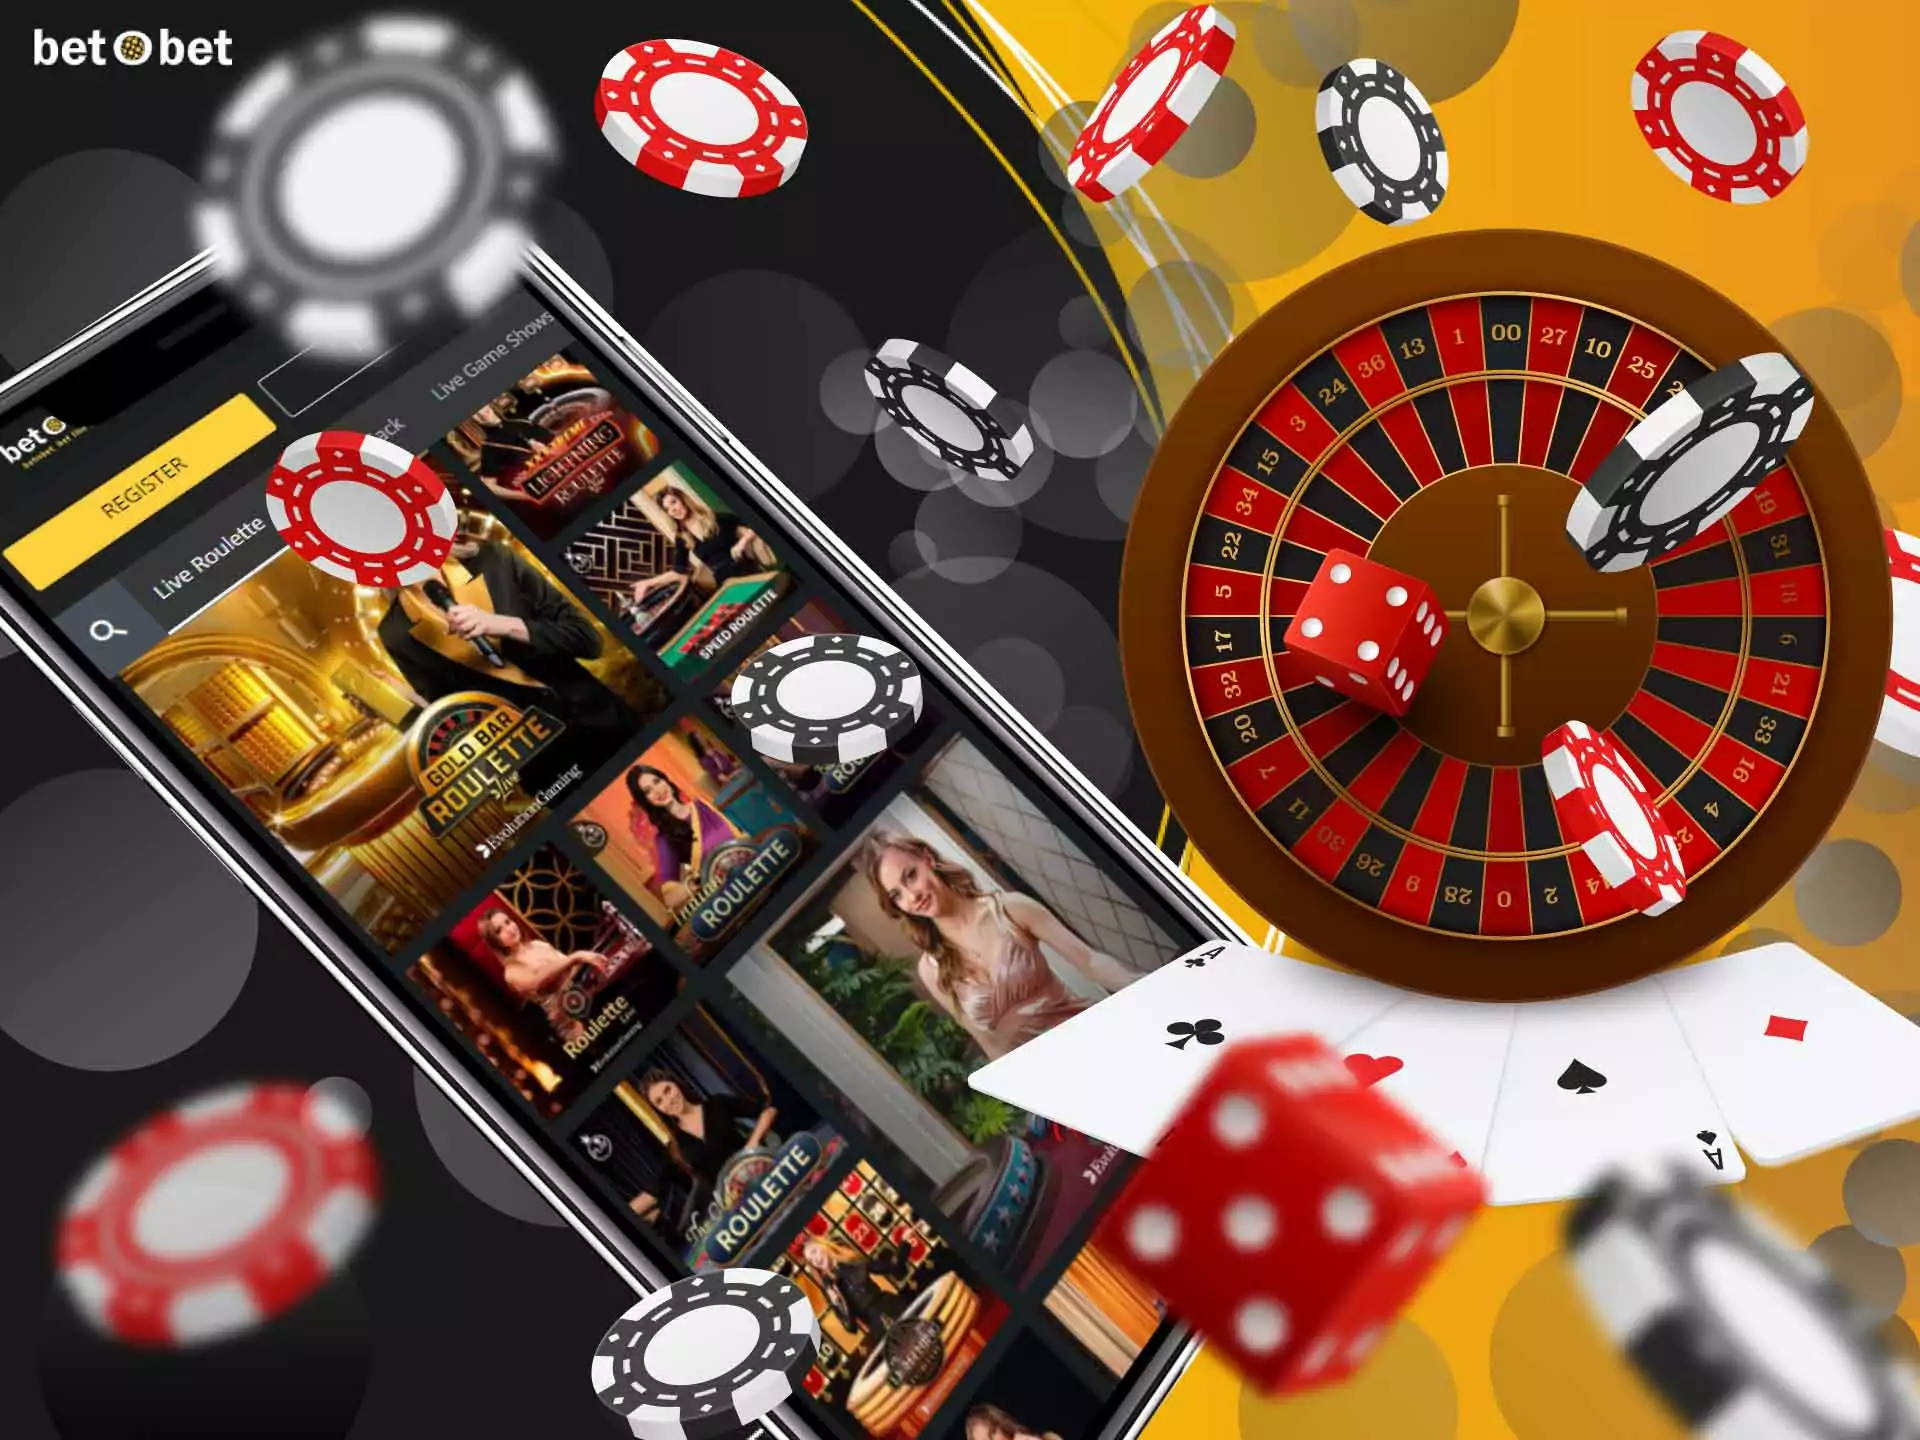 Play roulette witn real dealers and win at BetOBet.